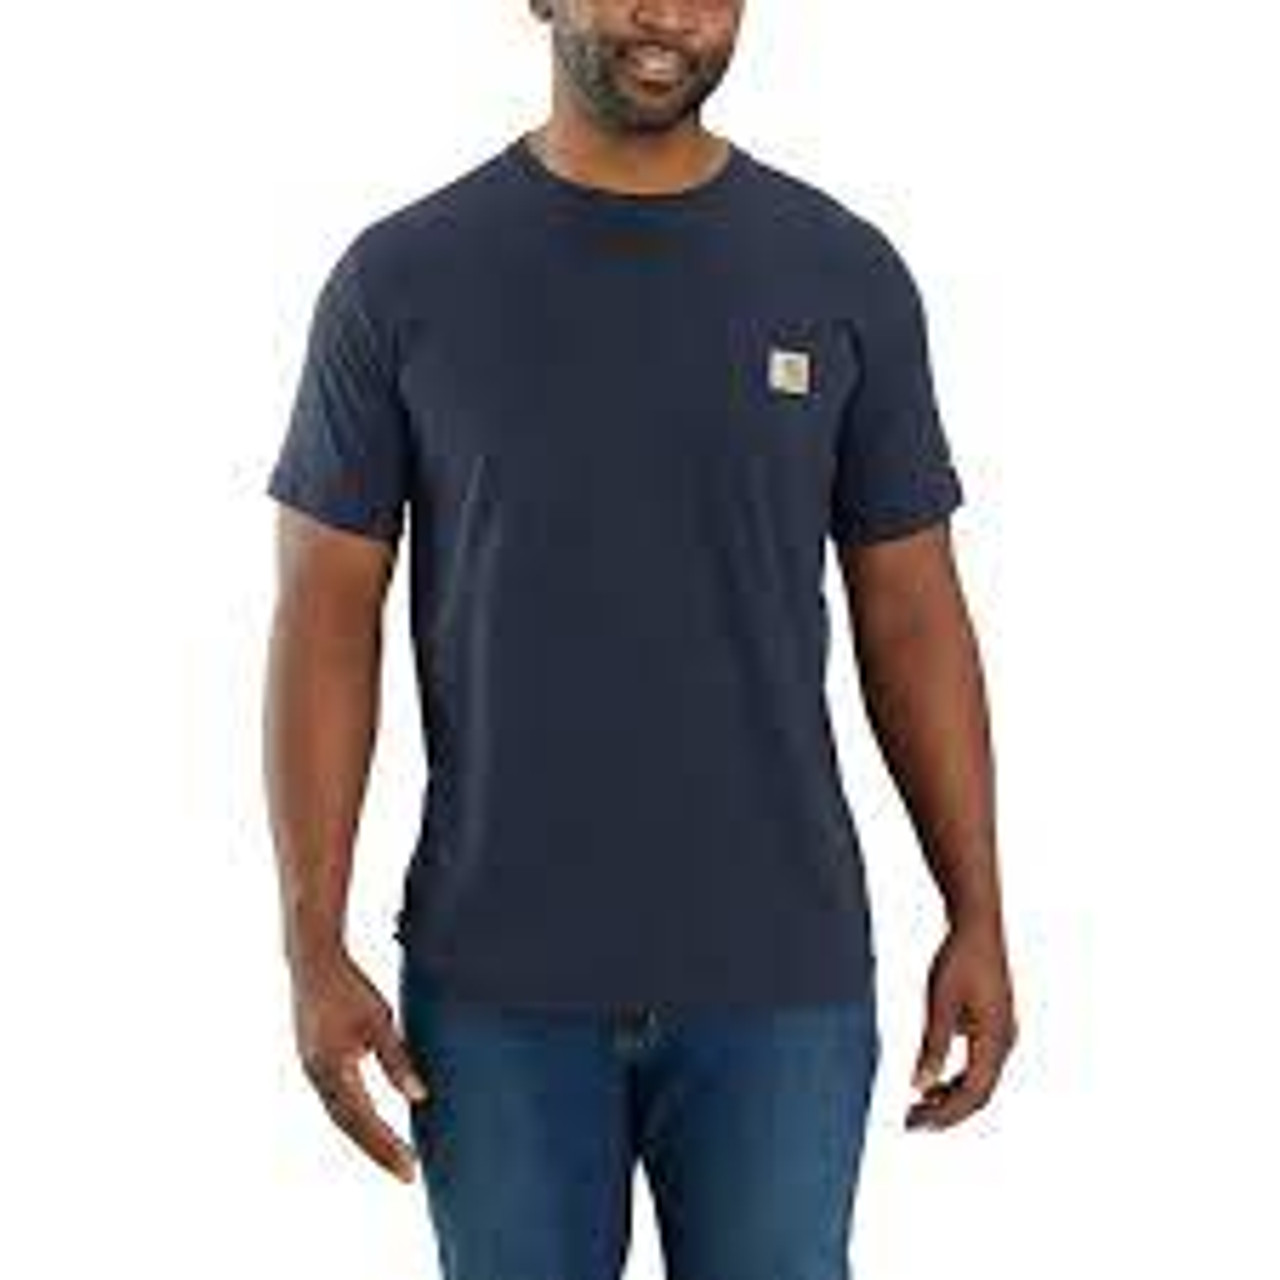 Carhartt Force Relaxed Fit Ventilated Pocket T-Shirt